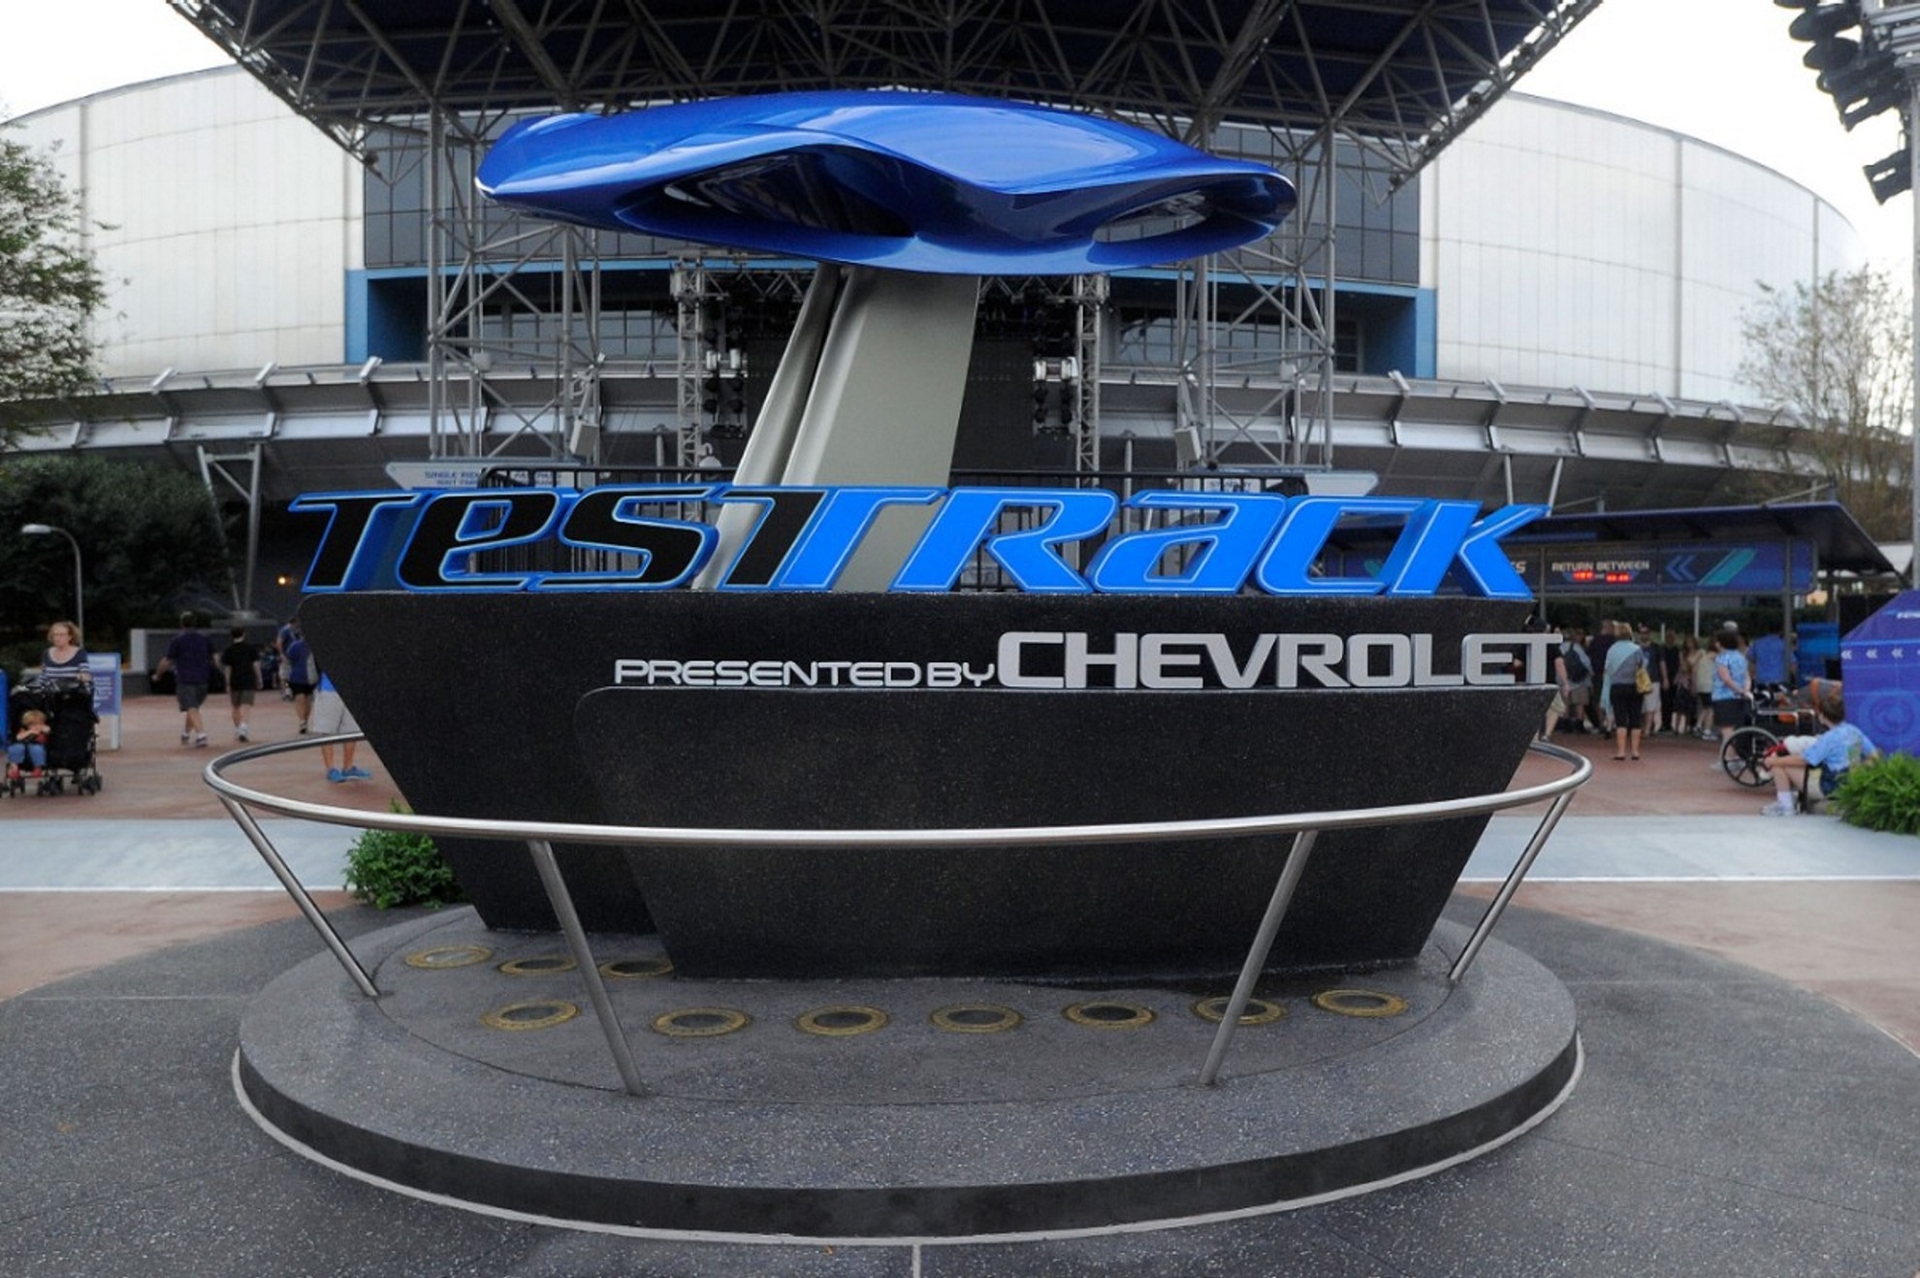 TEST TRACK PRESENTED BY CHEVROLET OPENS IN FLORIDA